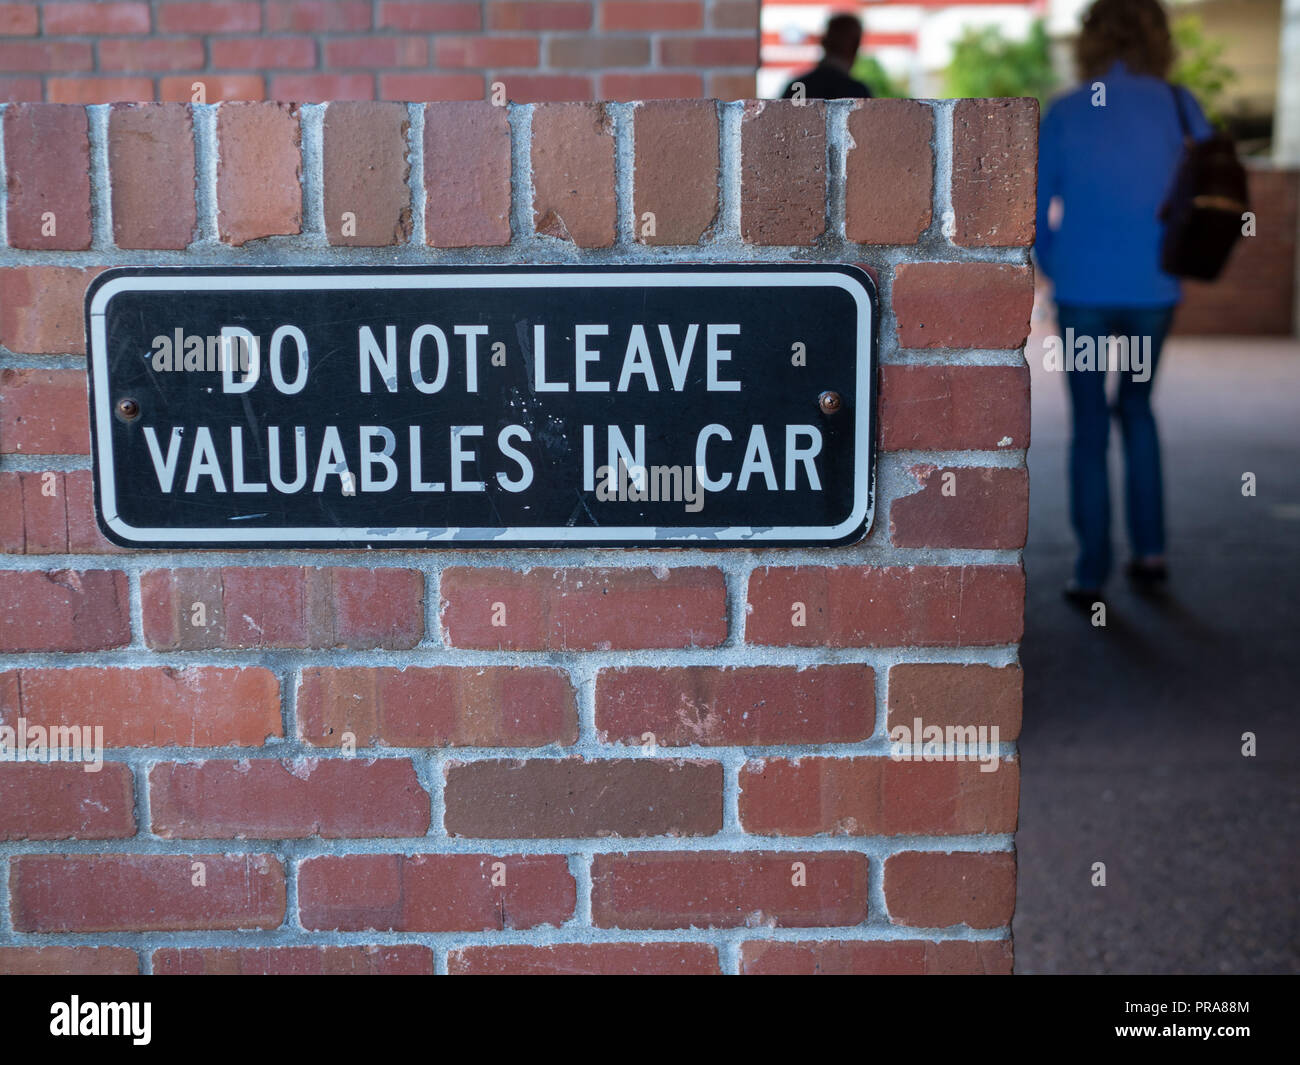 Some people walking away from do not leave valuables in car sign  Stock Photo